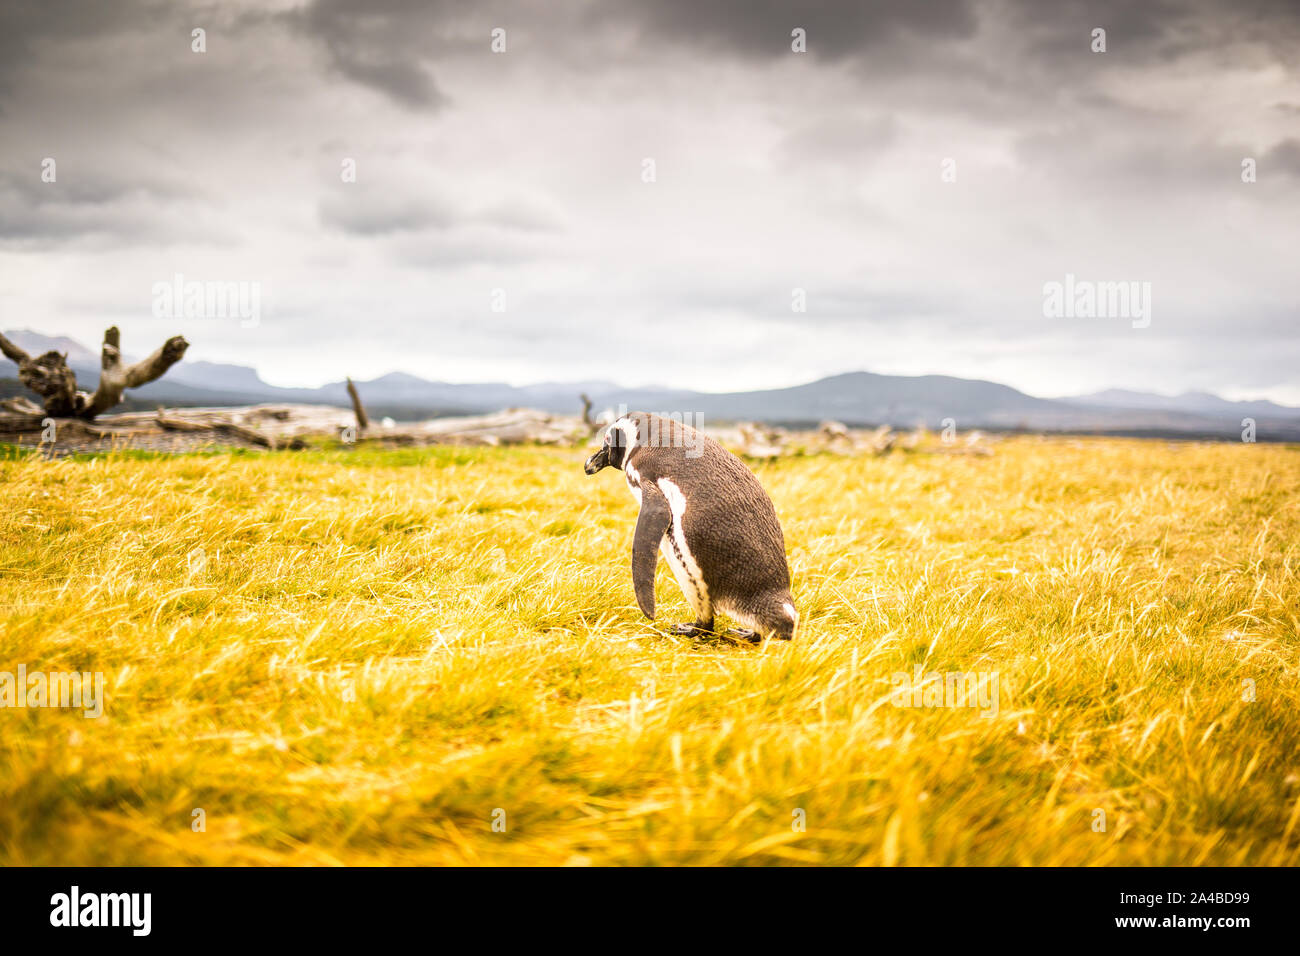 penguin wandering around in a beautiful desolated colorful landscape | Tierra del Fuego, Patagonia, Argentina Stock Photo